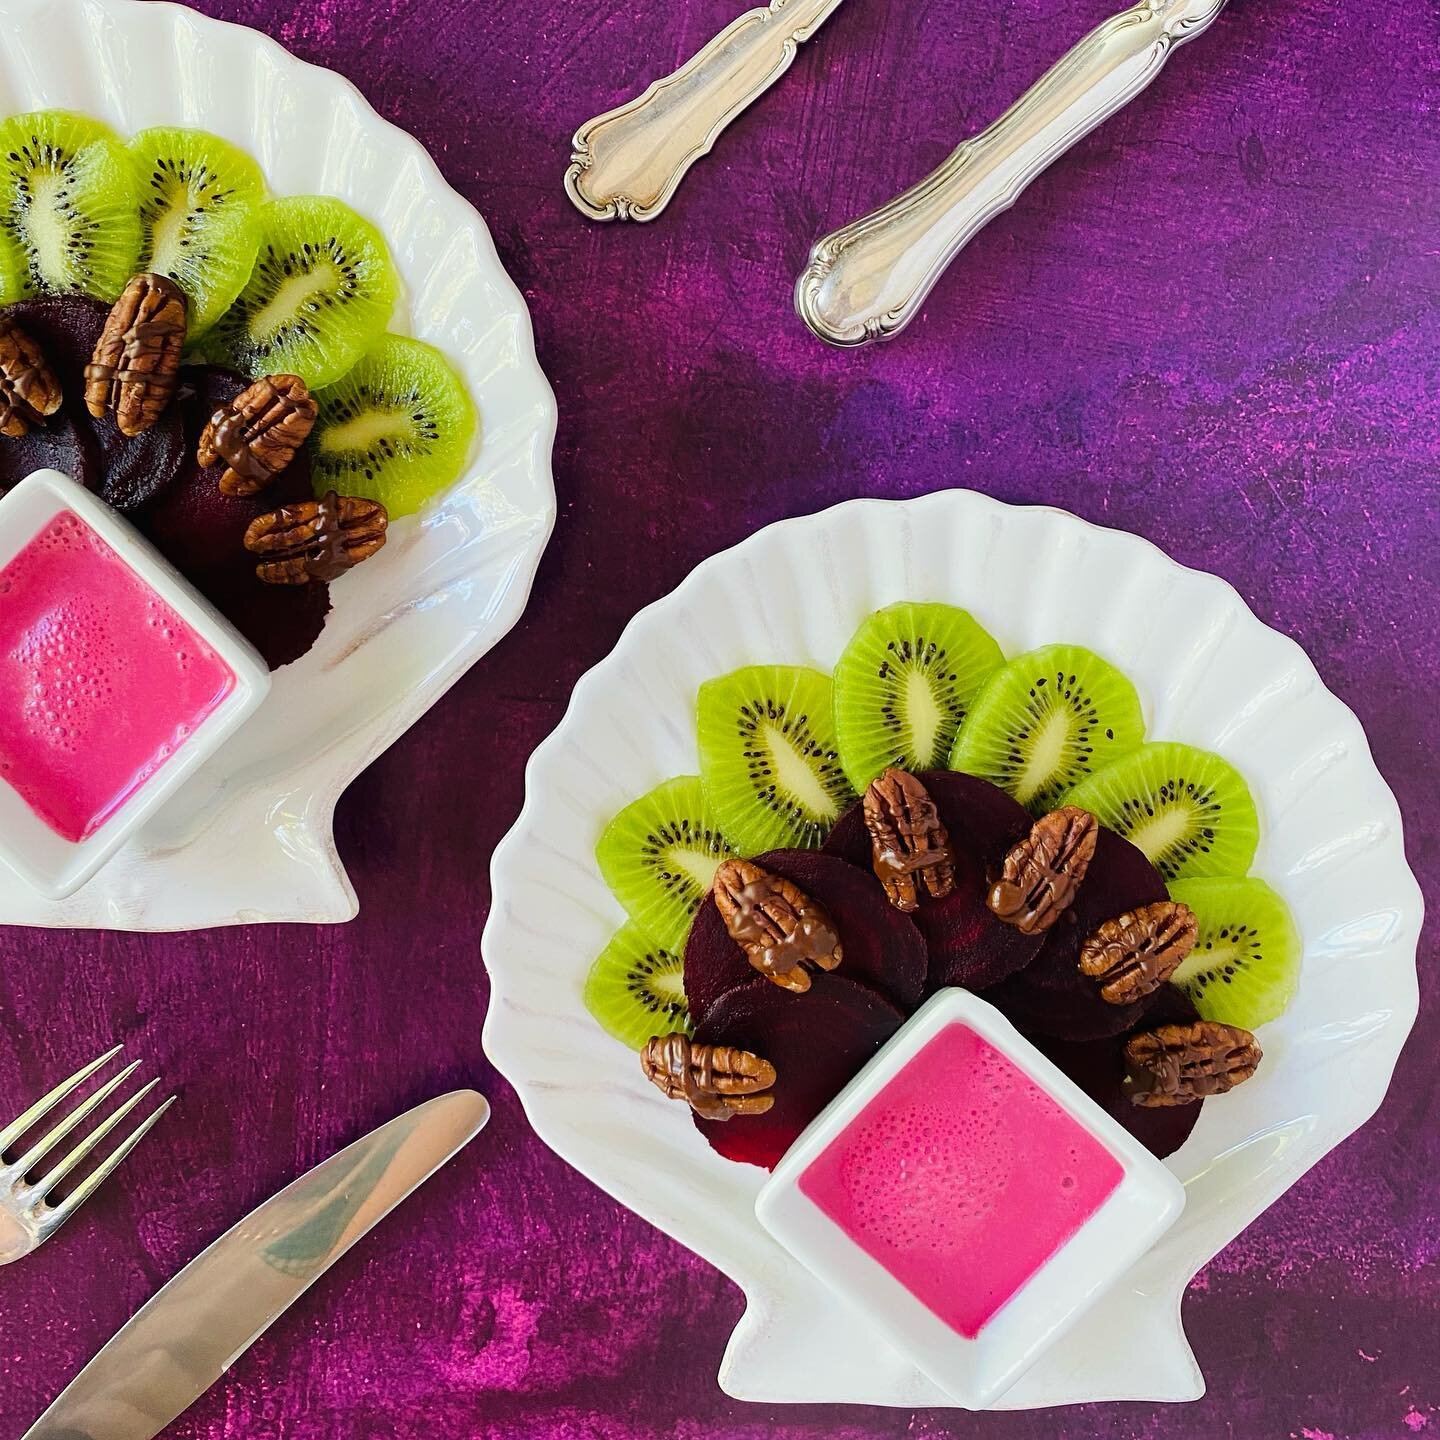 ✨✨✨
🥝 💖Kiwi - Red Beet Carpaccio 💖🥝 

check out my original recipe in our new cookbook: ✨MAGICFOODVEGAN ✨  with @callwey 

❗️Preorder now on AMAZON❗️ 
#magicfoodvegan #original #recipe in #new #cookbook #kochbuch with @callwey #artwork by @bergon